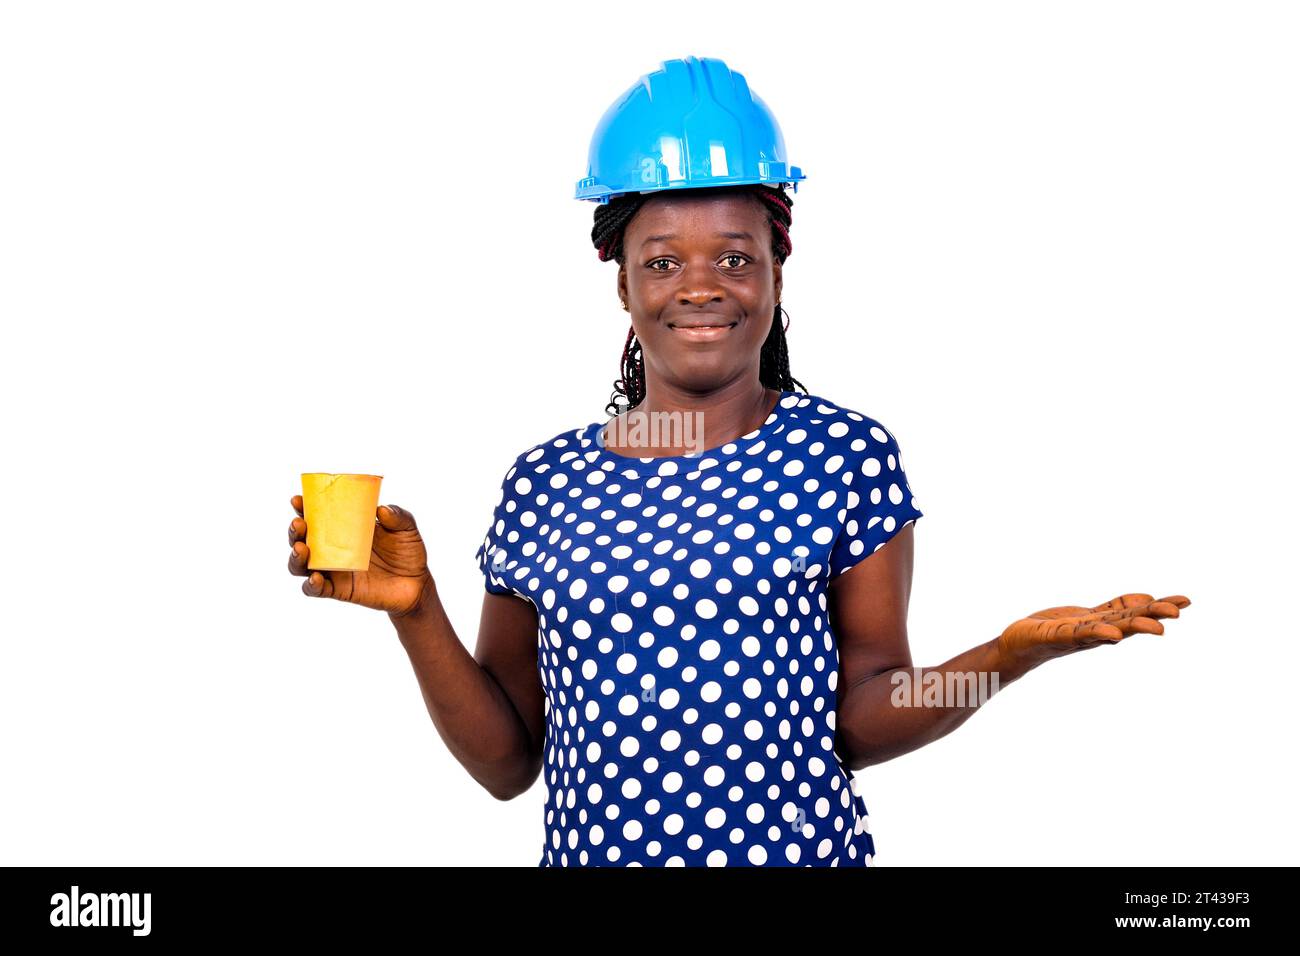 young female construction engineer wearing a blue hard hat holding a paper coffee cup and gesturing her hand. Stock Photo